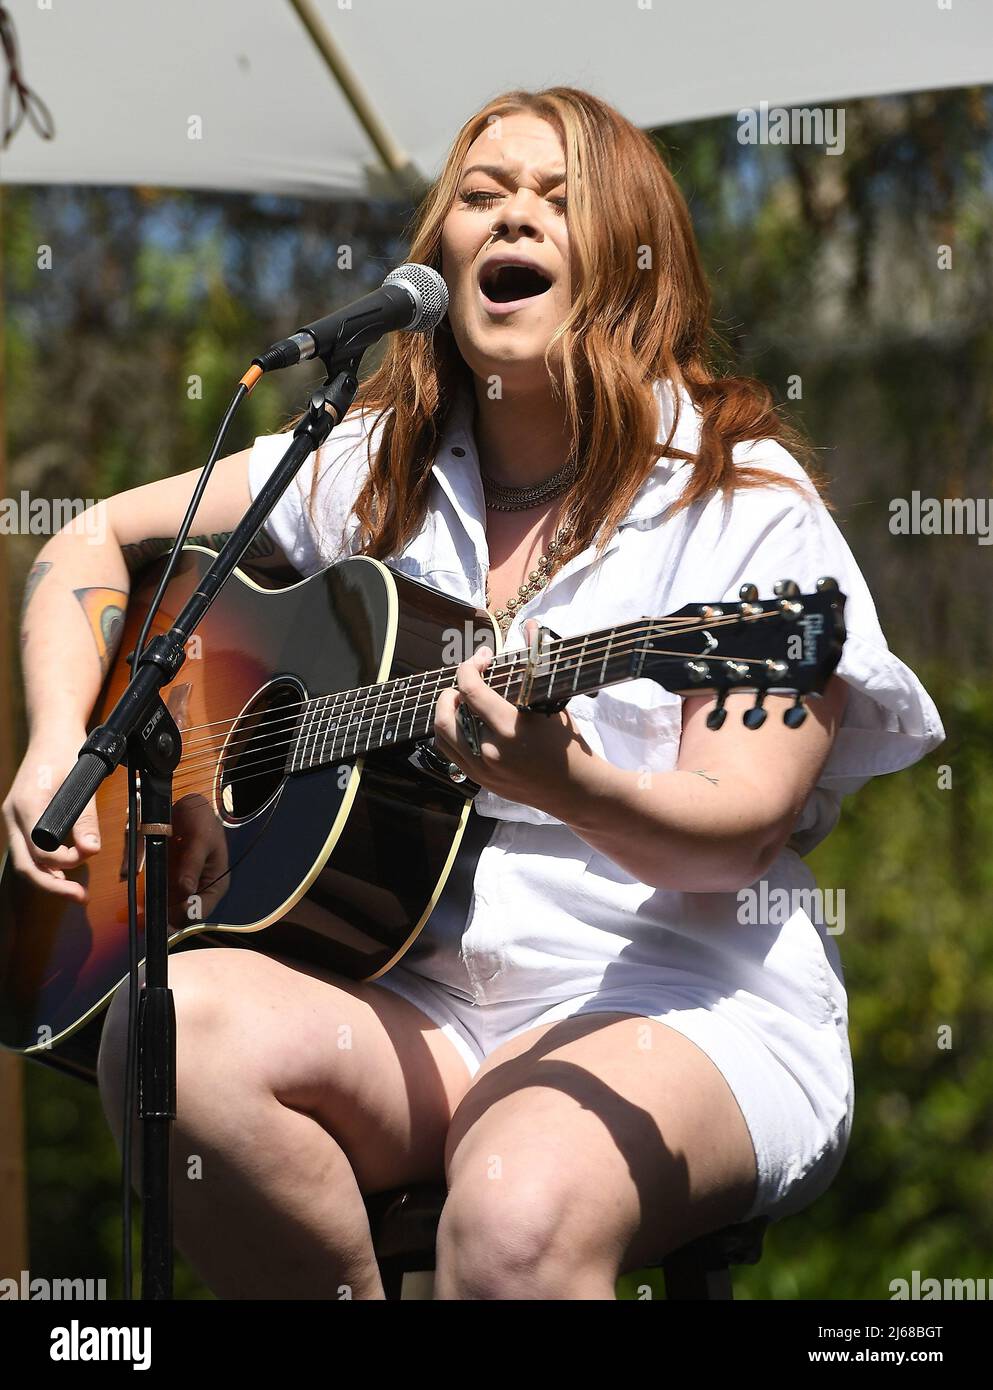 California, USA. 28th Apr, 2022. Ashland Craft performs at Live In The Vineyard Goes Country at Domaine Chandon Winery on April 27, 2022 in Yountville, California. Photo: Casey Flanigan/imageSPACE/Sipa USA Credit: Sipa USA/Alamy Live News Stock Photo